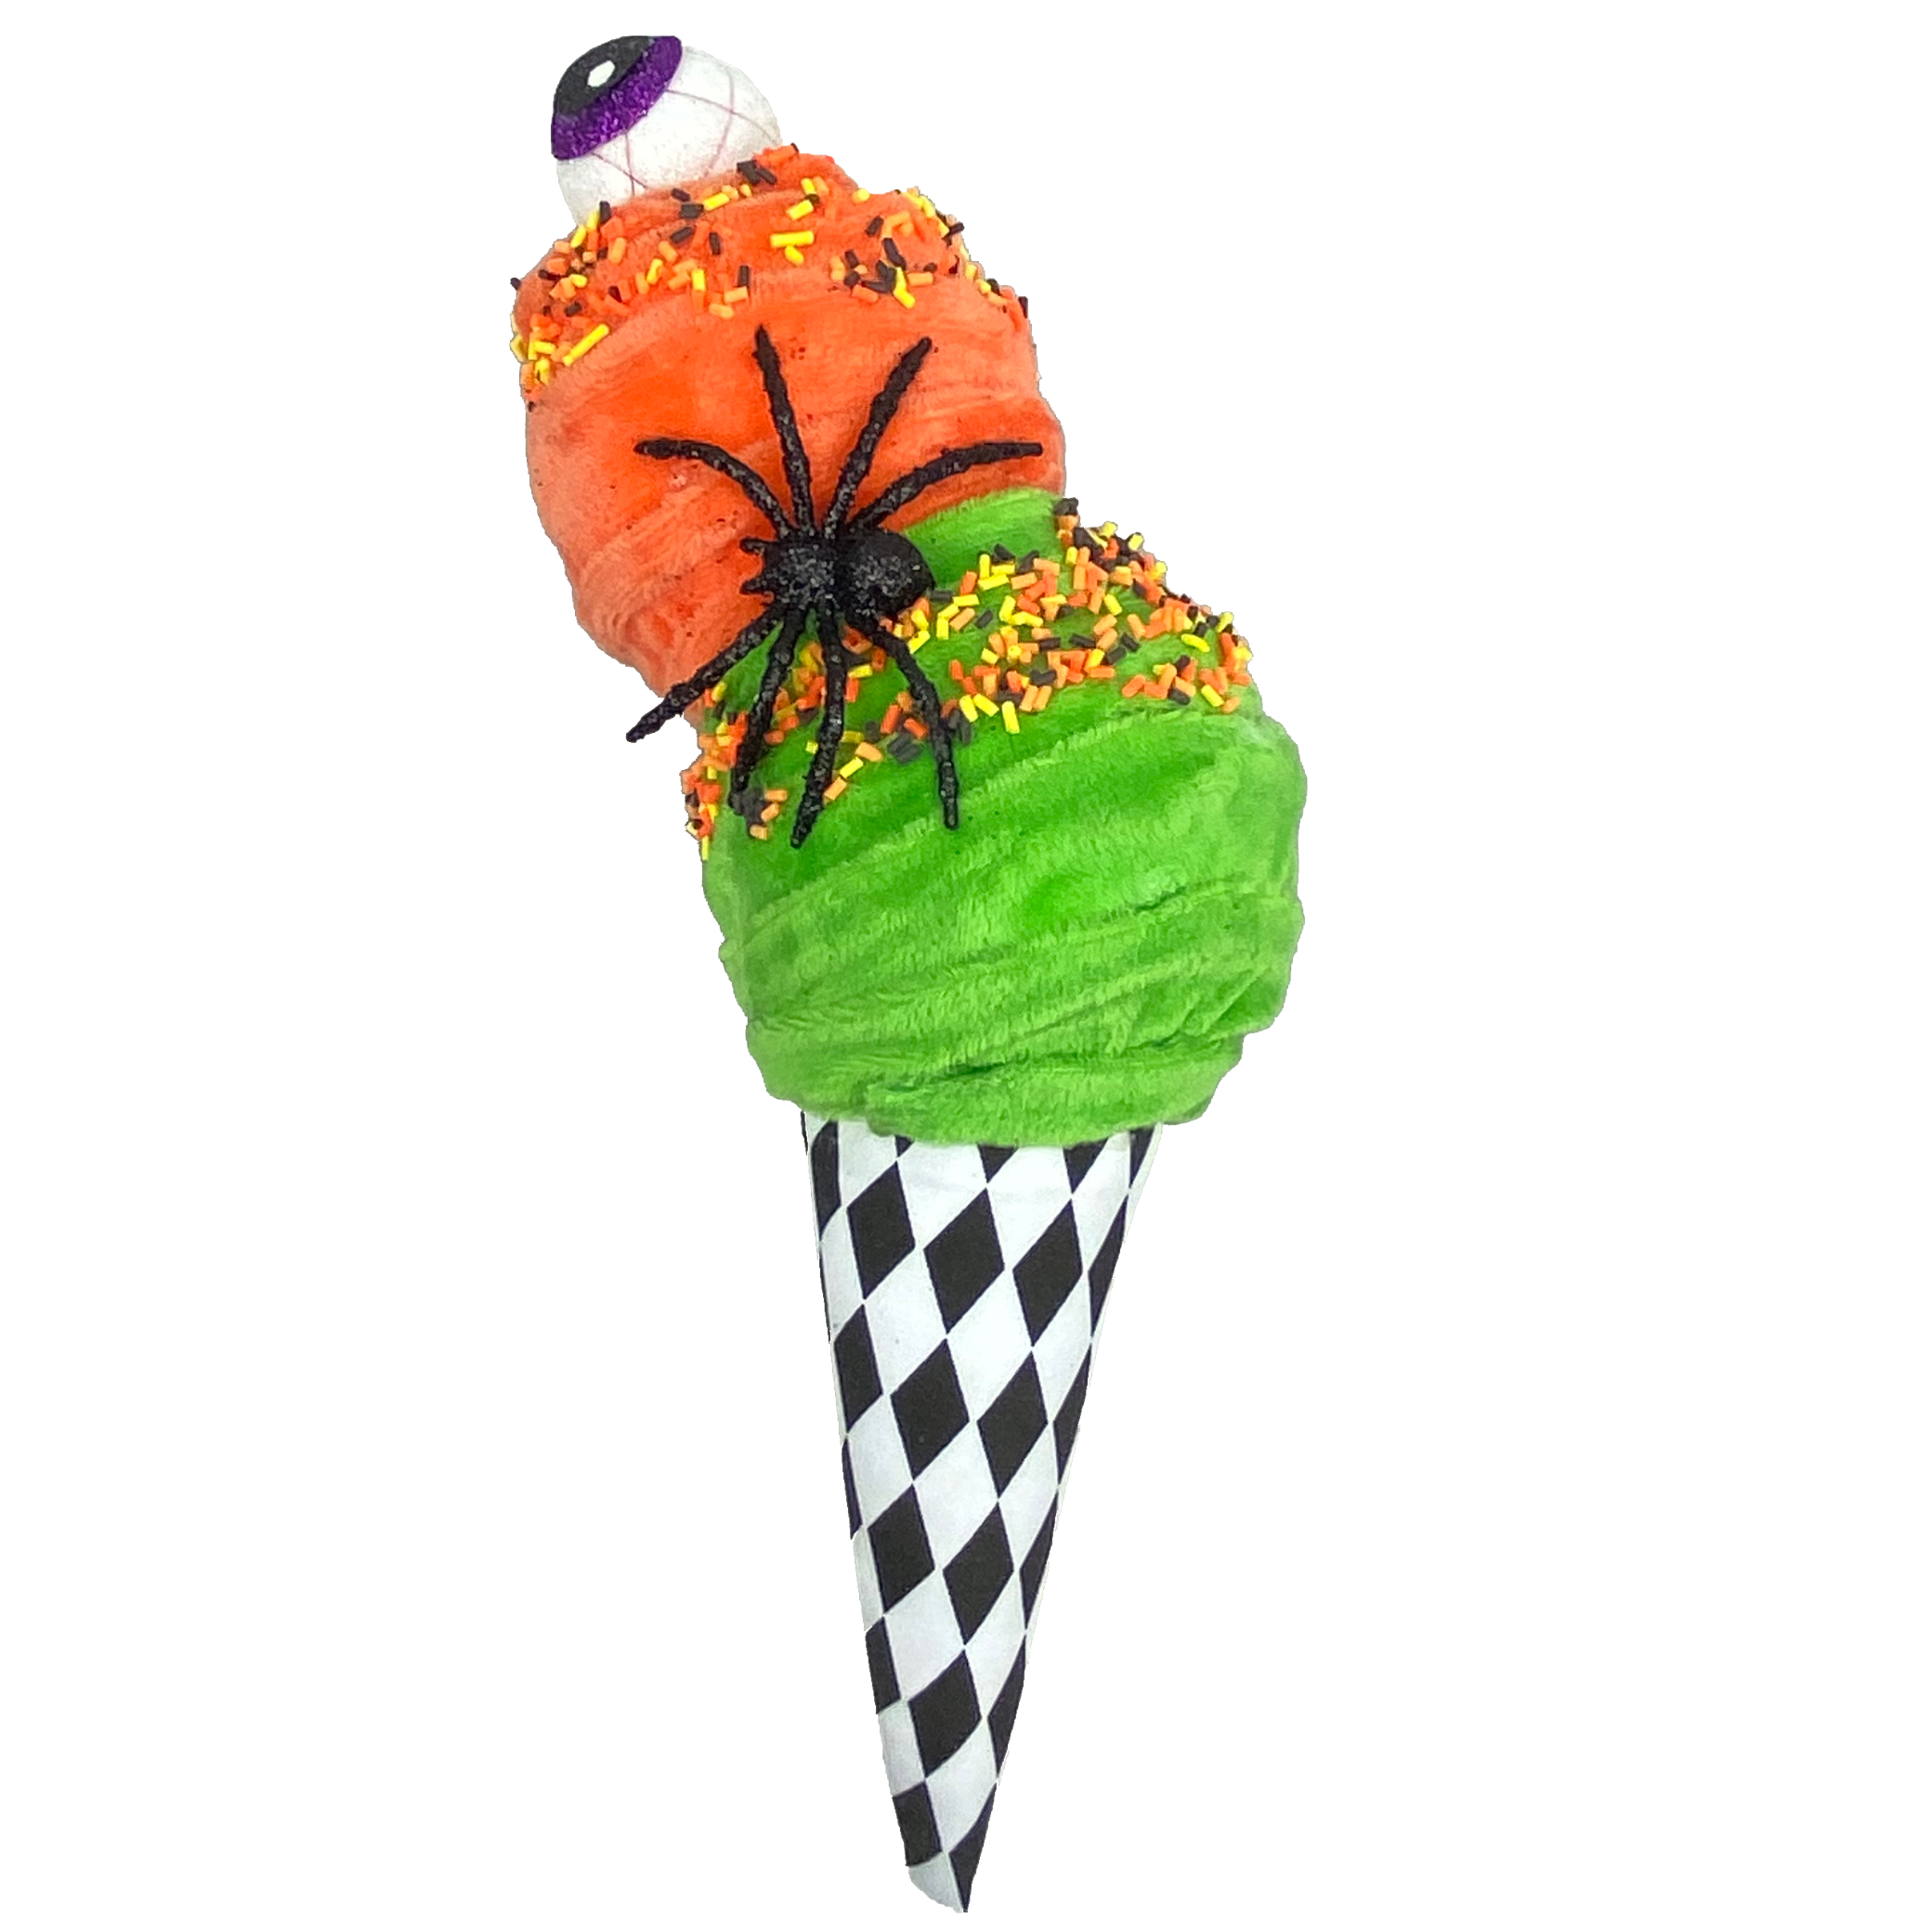 orange and green ice cream cone with eyeball and spider